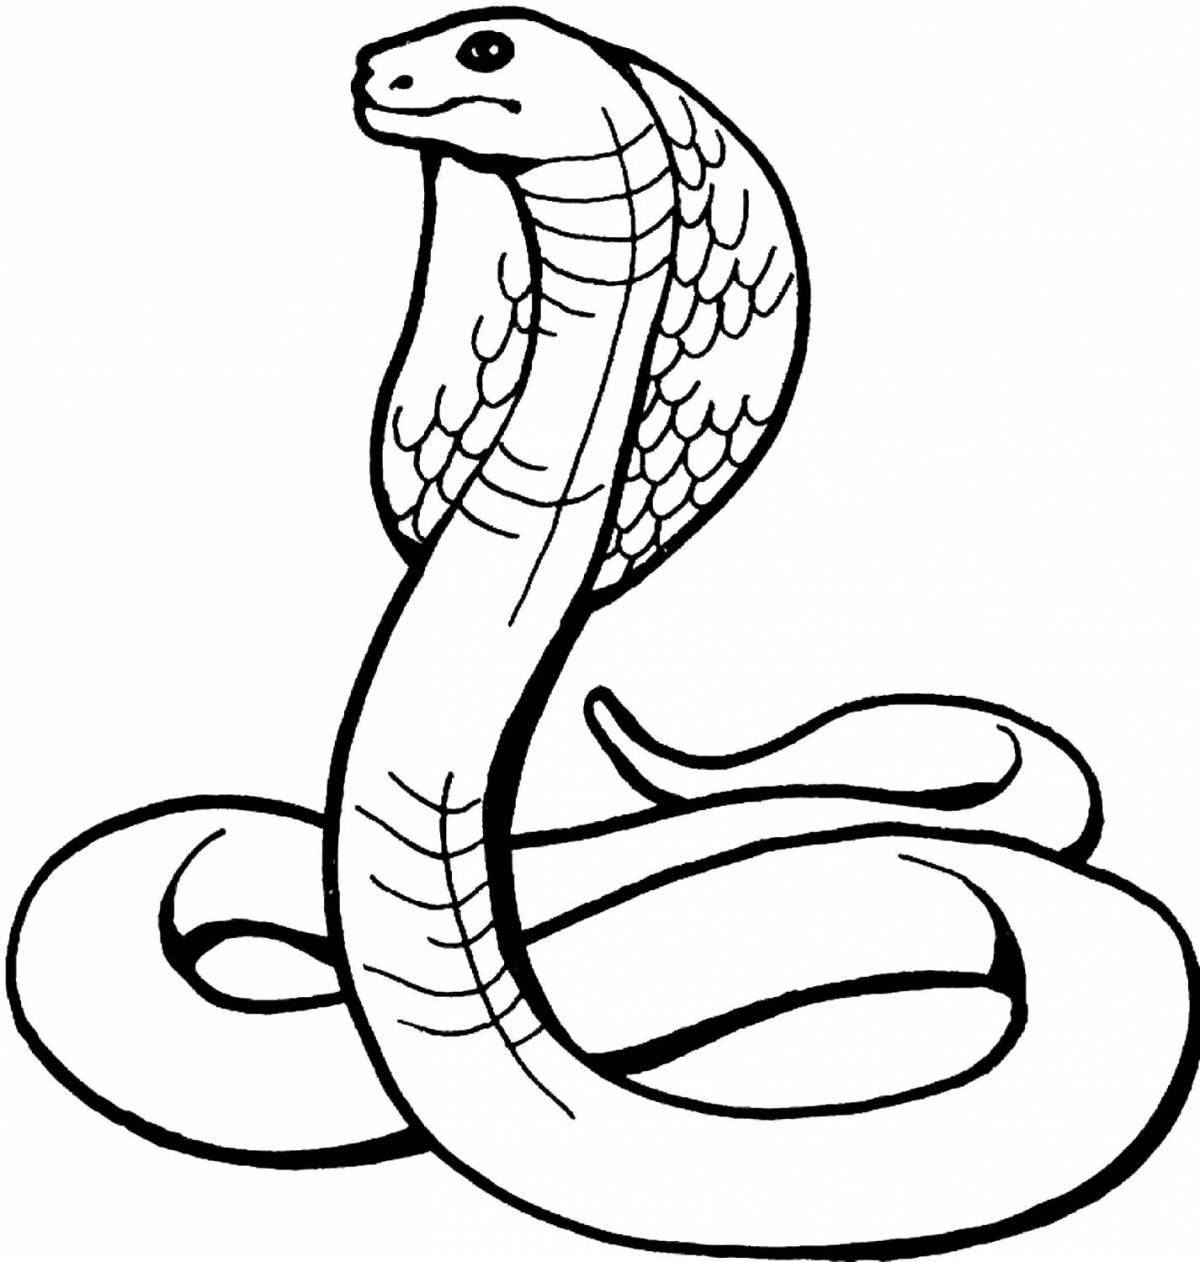 Gourmet viper coloring page